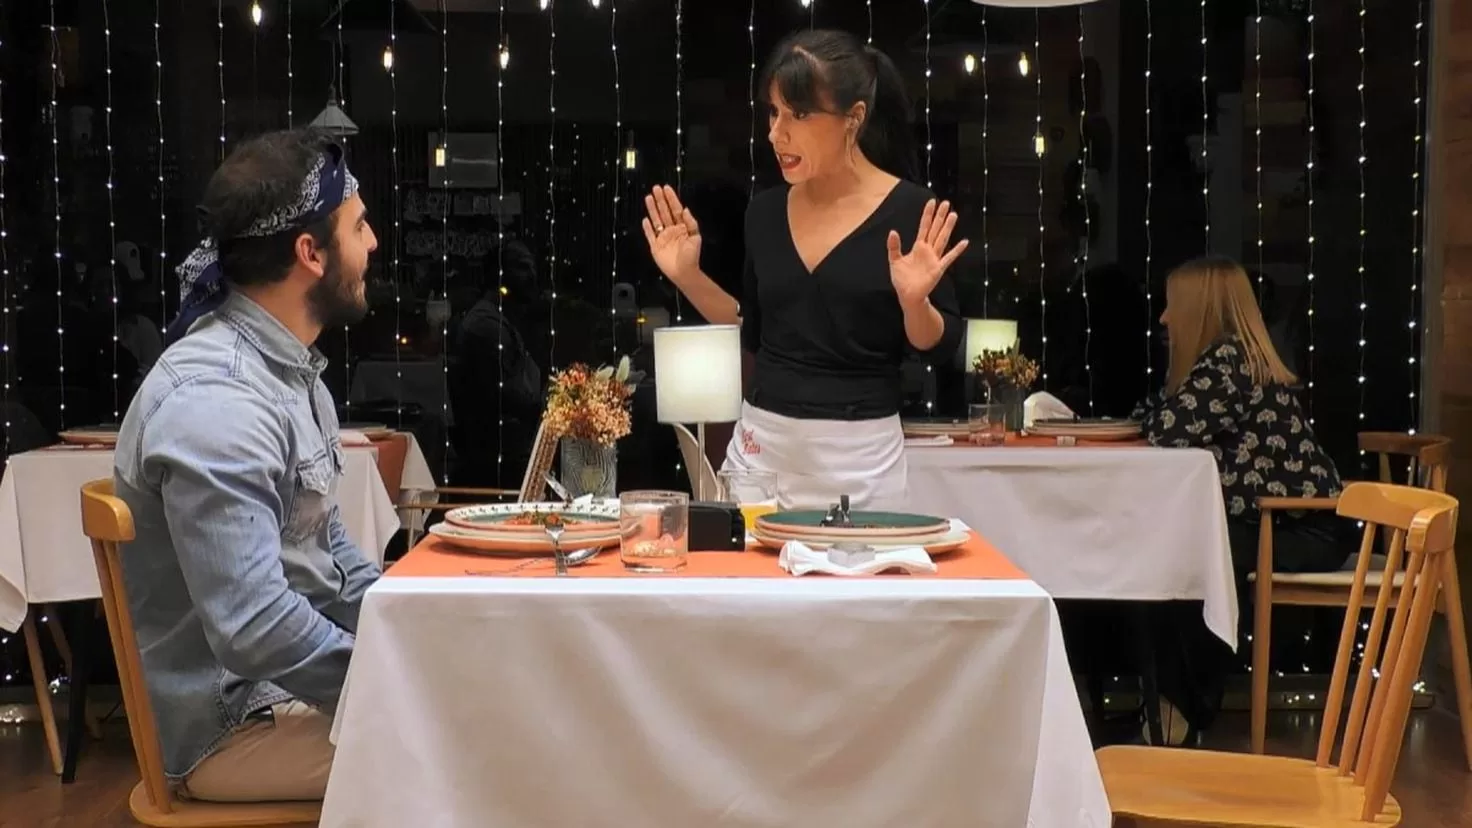 A First Dates bachelor runs away from dinner when his partner is in the bathroom
